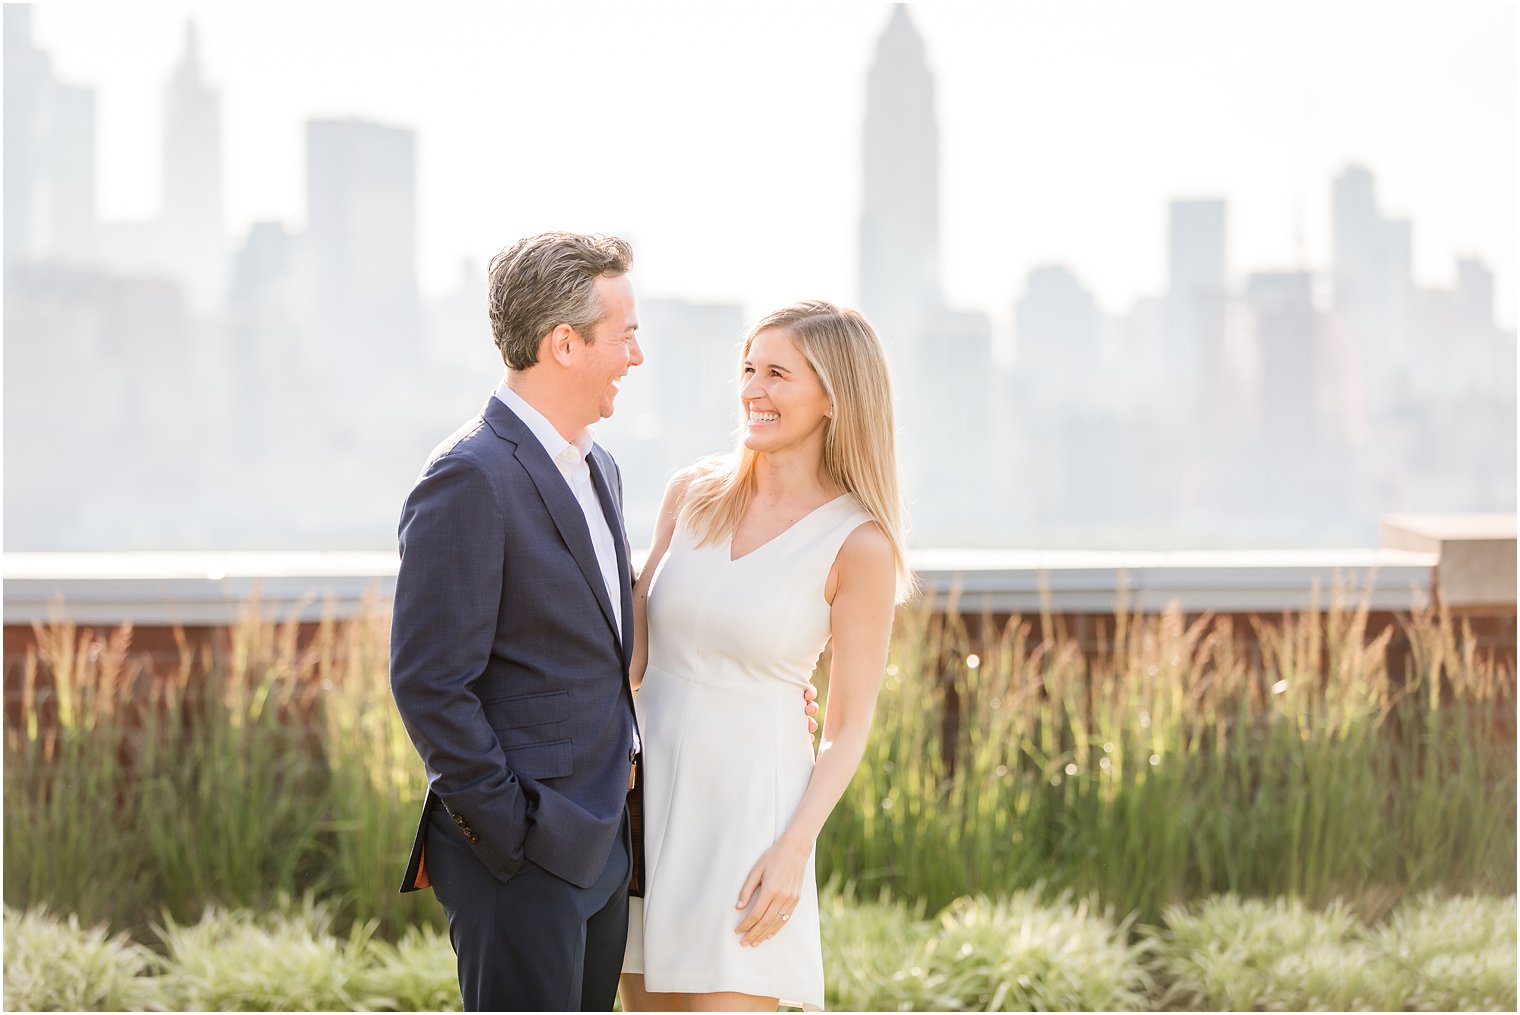 Bride smiling at groom | Hoboken Rooftop Engagement by Idalia Photography